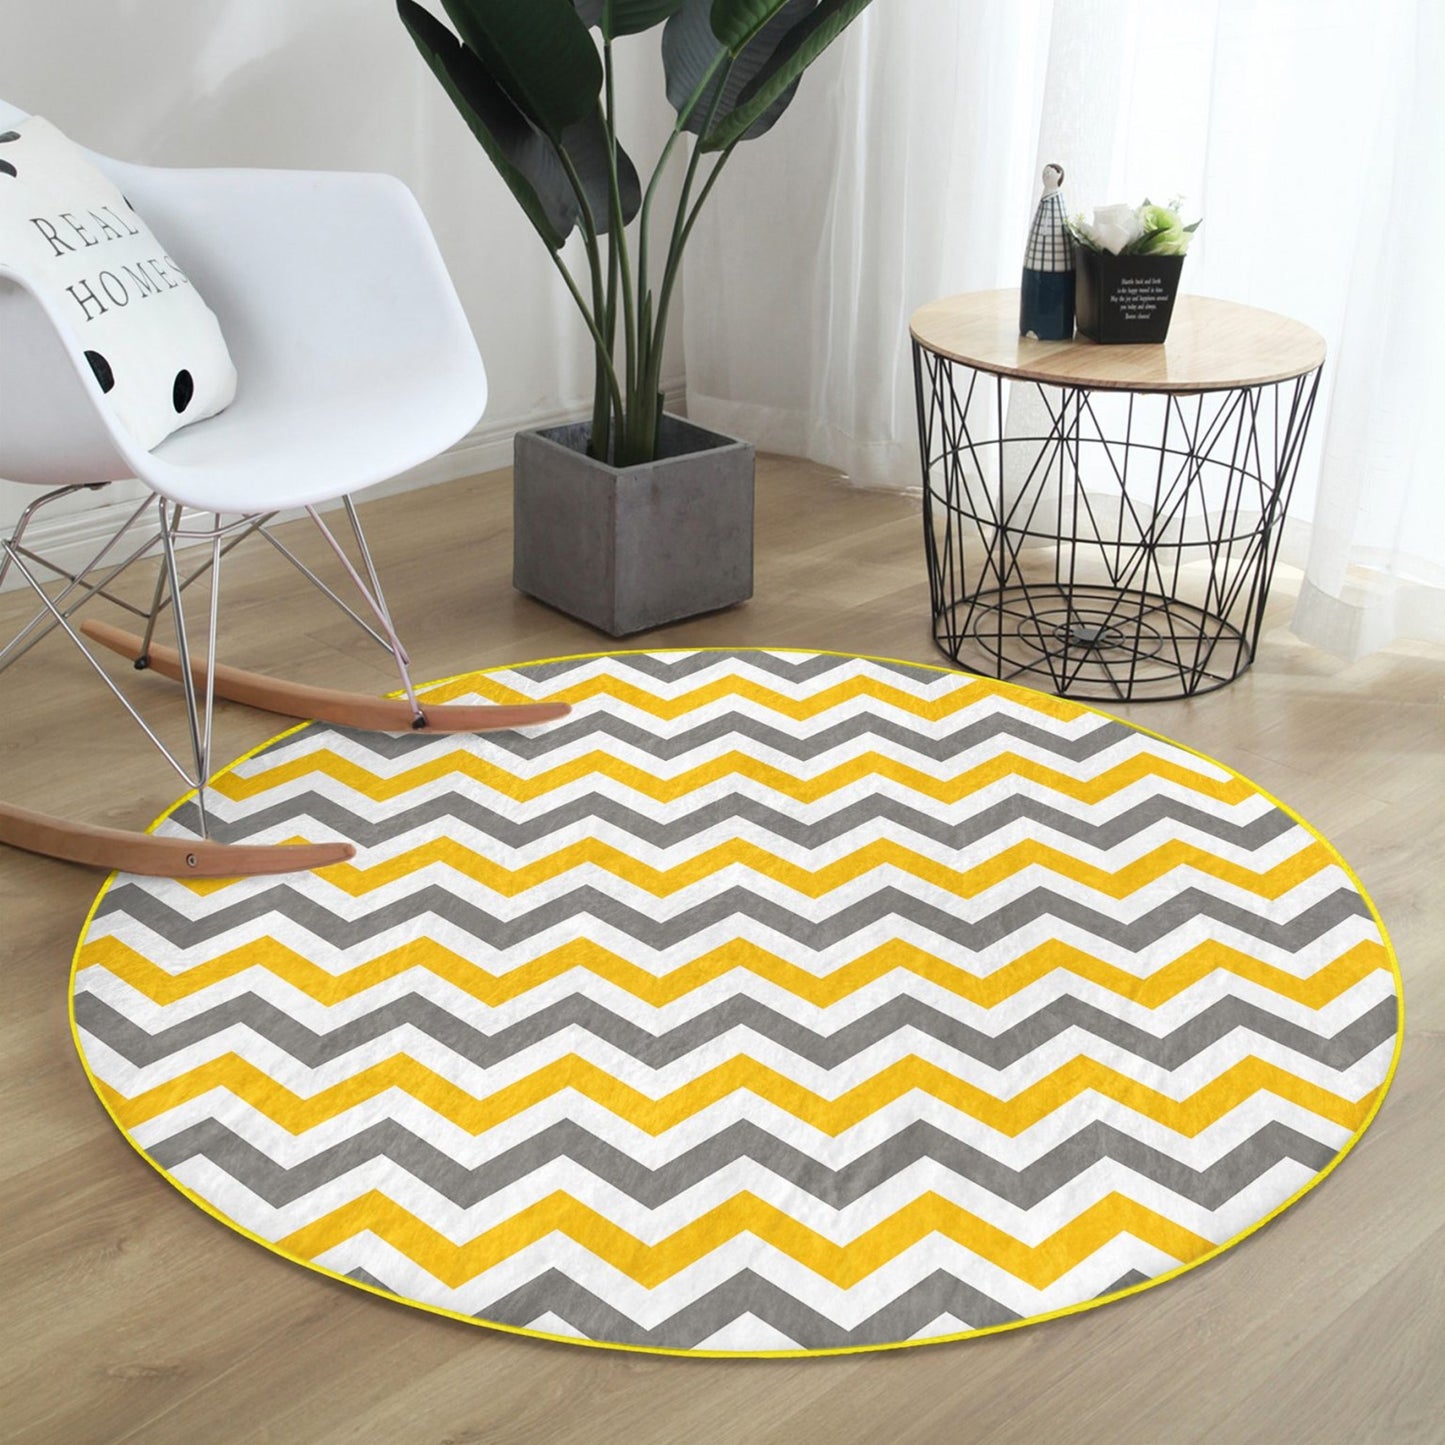 Add a Pop of Color with Zigzag Washable Rug